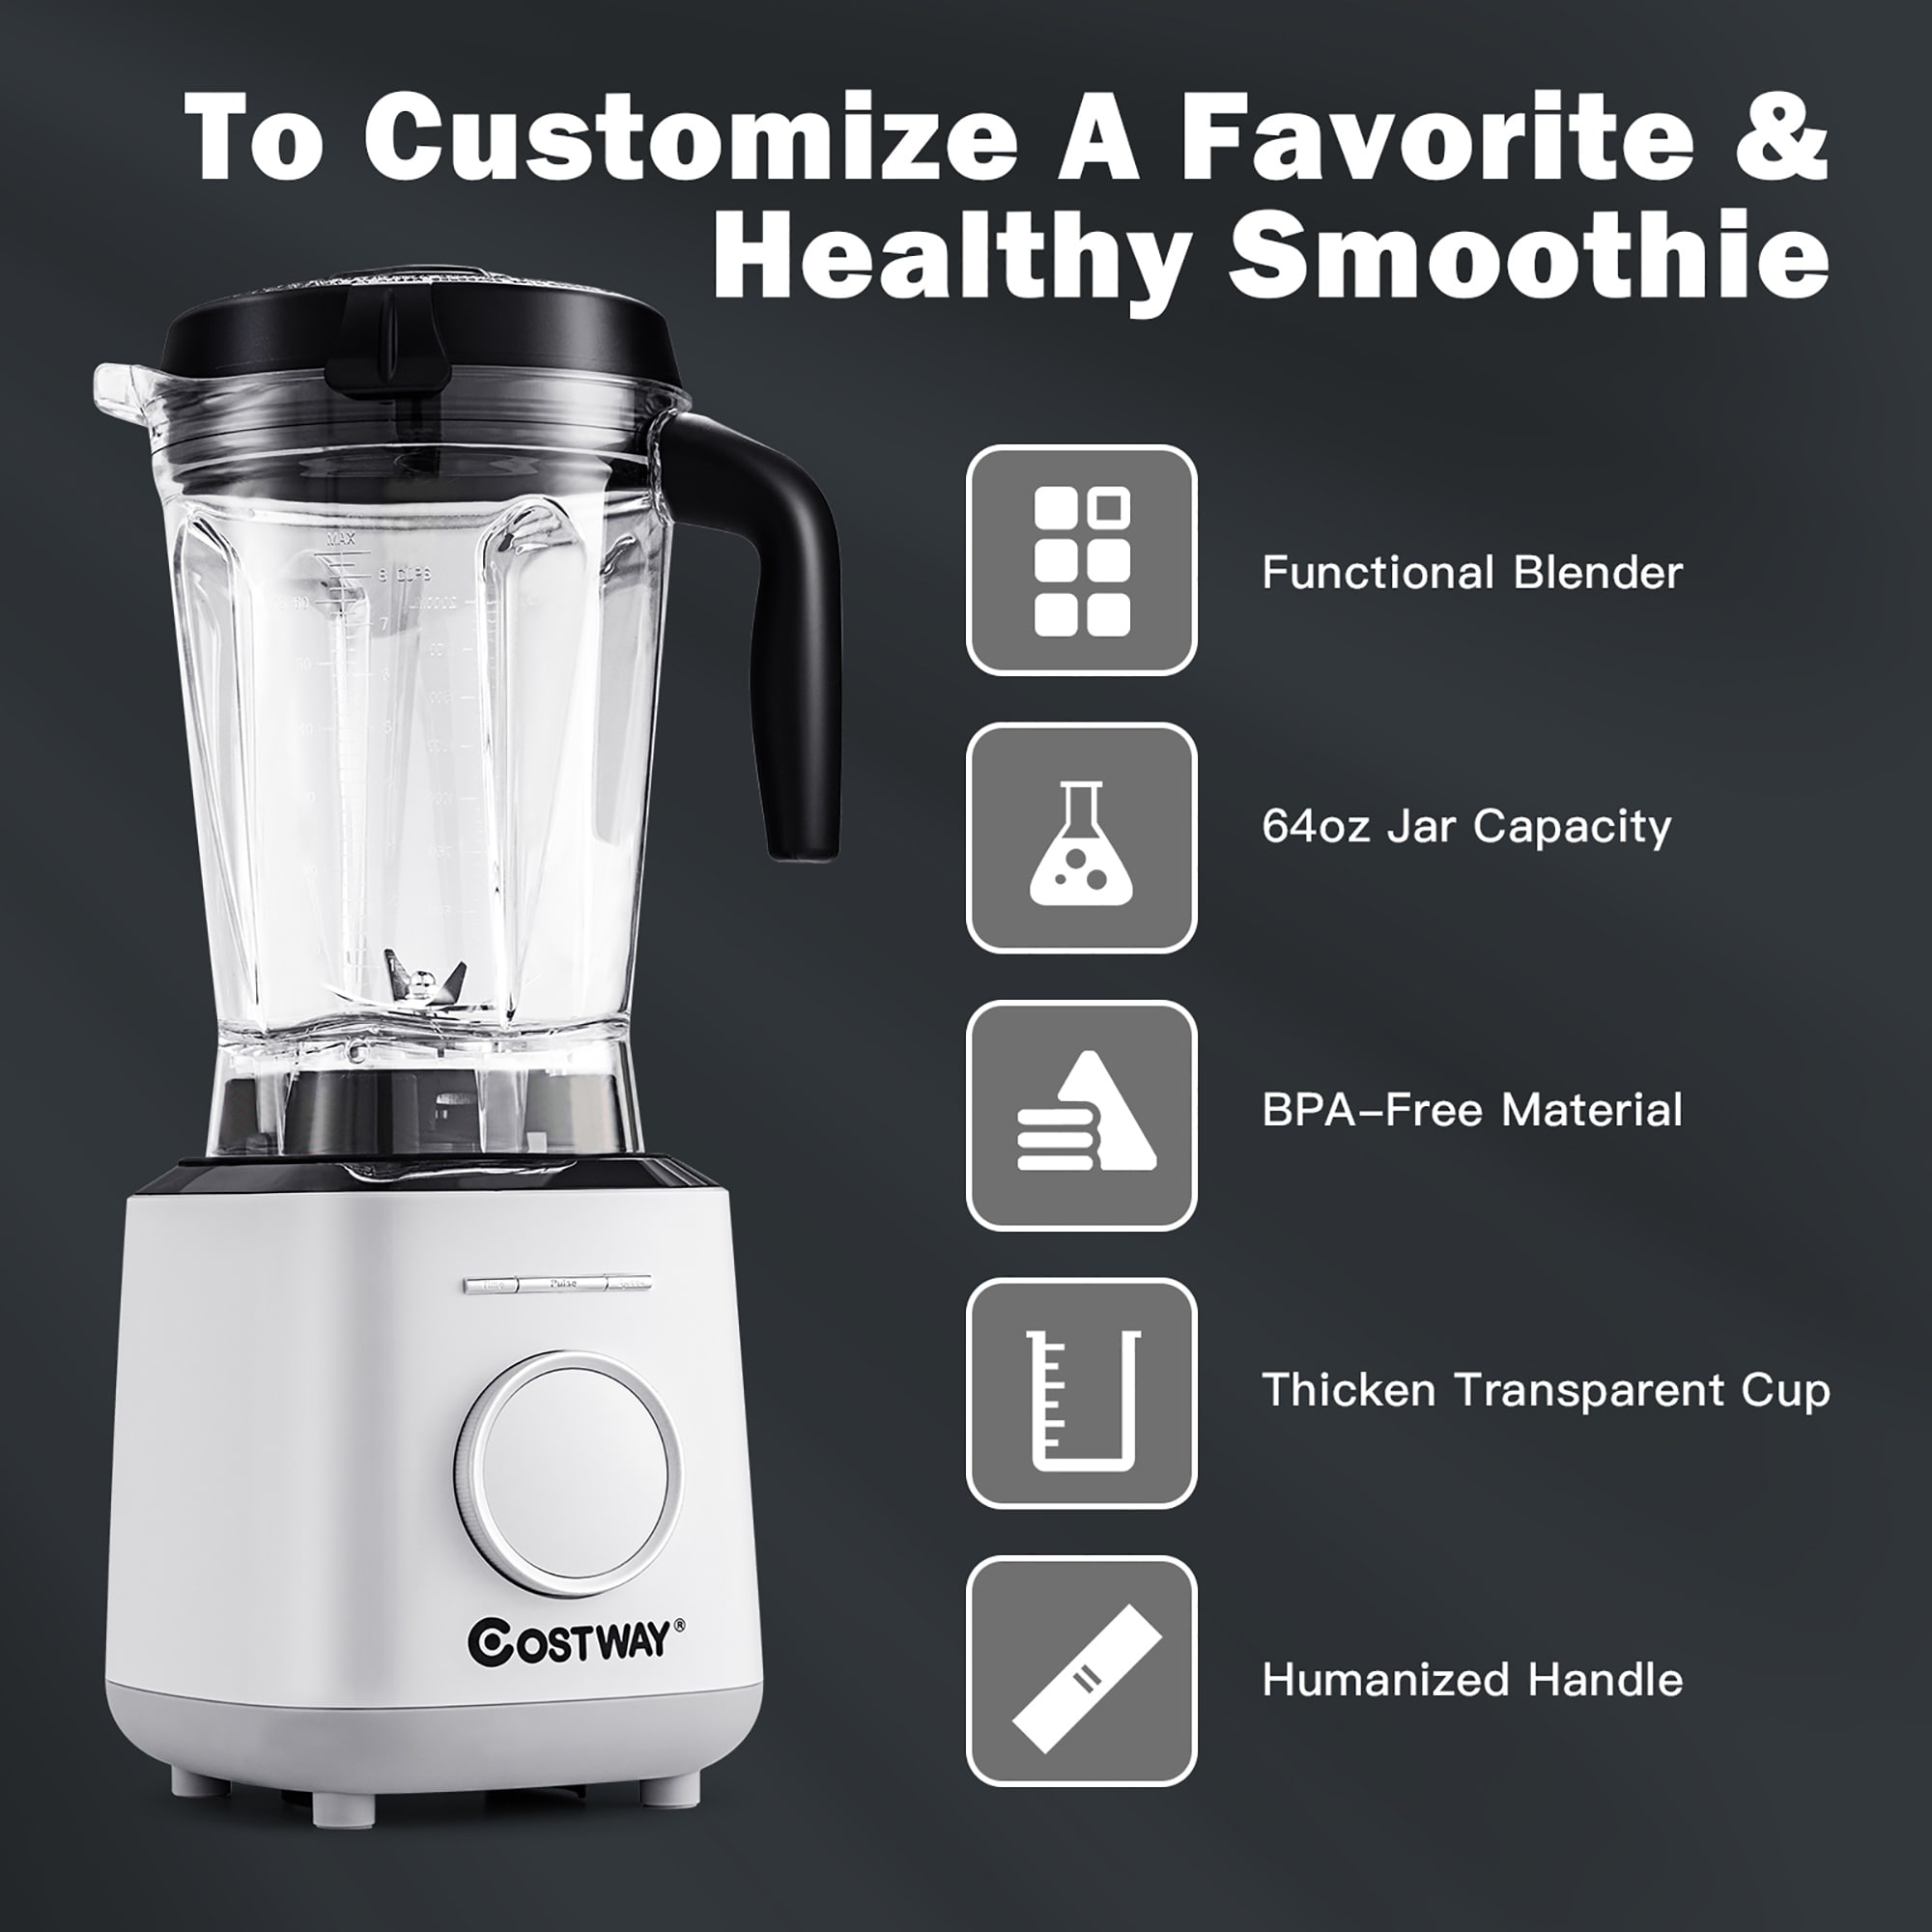 https://ak1.ostkcdn.com/images/products/is/images/direct/79db94197471bacfa3800da5c446a75de91190e8/Costway-1500W-Countertop-Smoothies-Blender-10-Speed-w--6-Pre-Setting.jpg